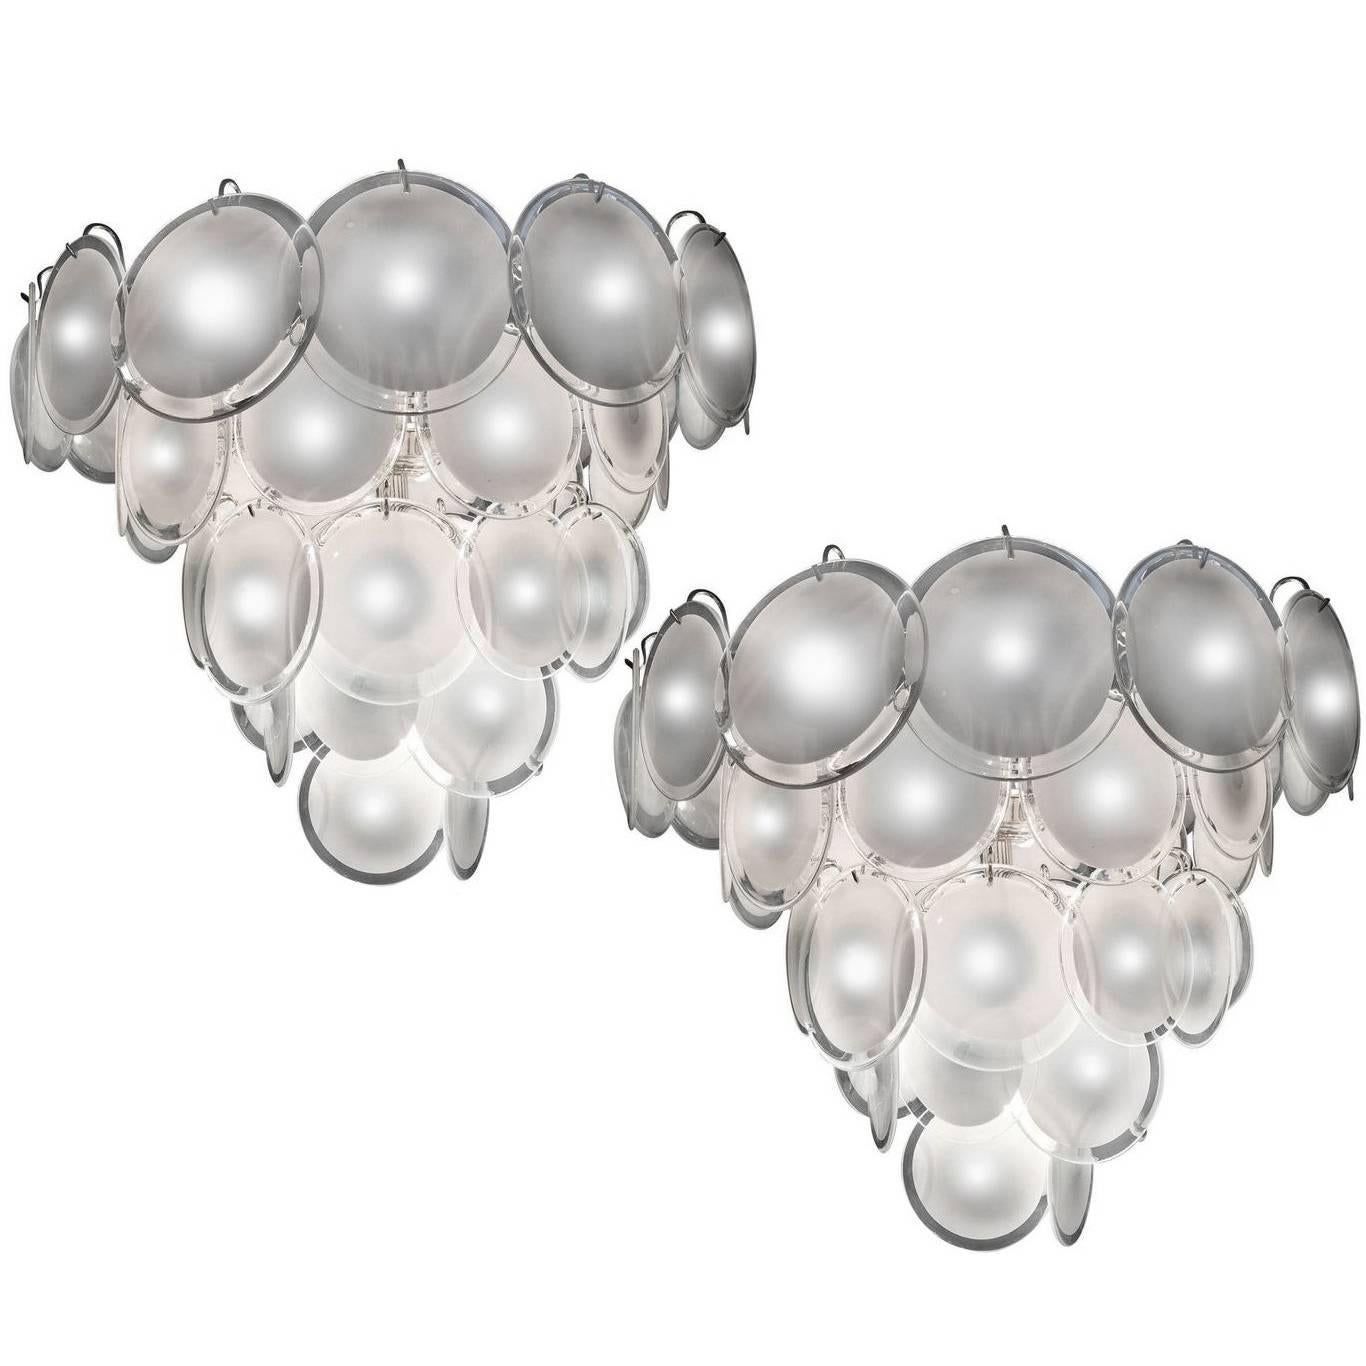 Spectacular pair of chandeliers by Vistosi made of 50 Murano discs white put on five floors. Six available items with matching wall sconces.